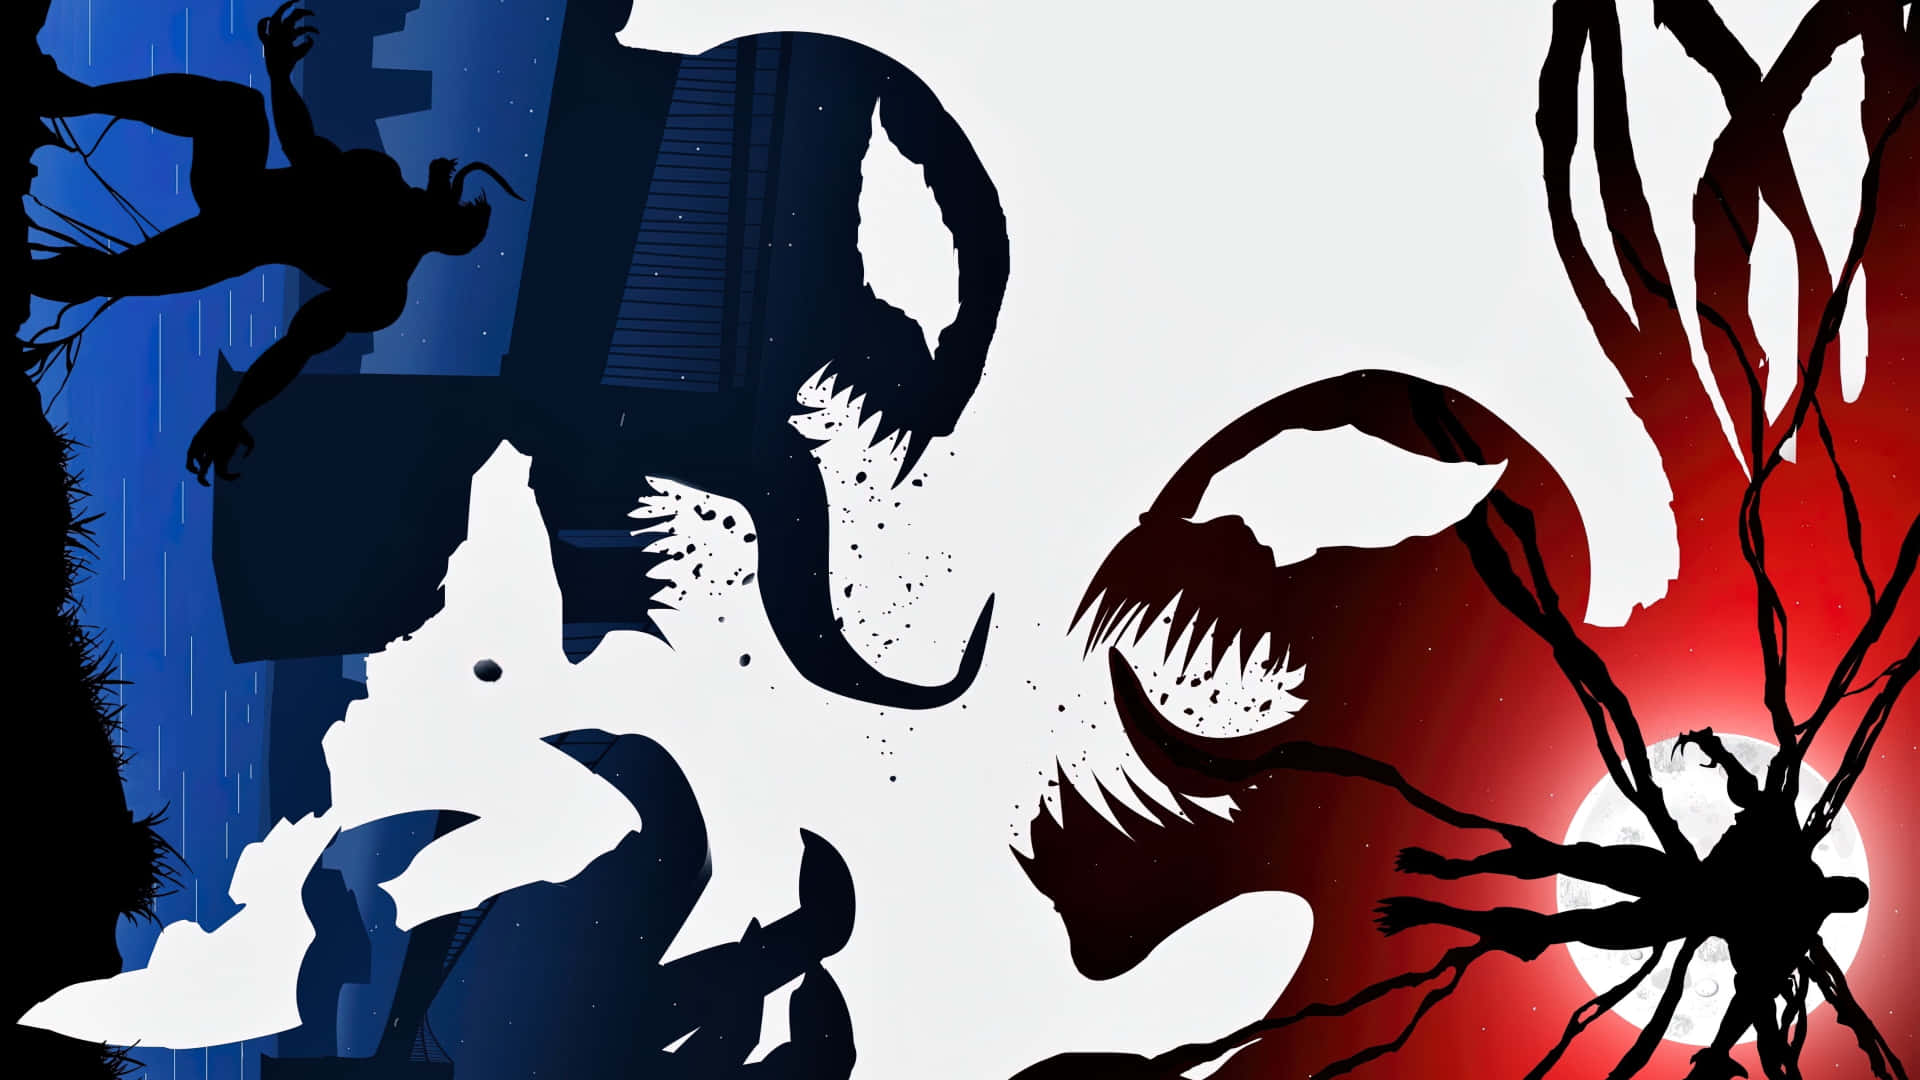 Carnage and Venom Face Off in Epic Battle Wallpaper